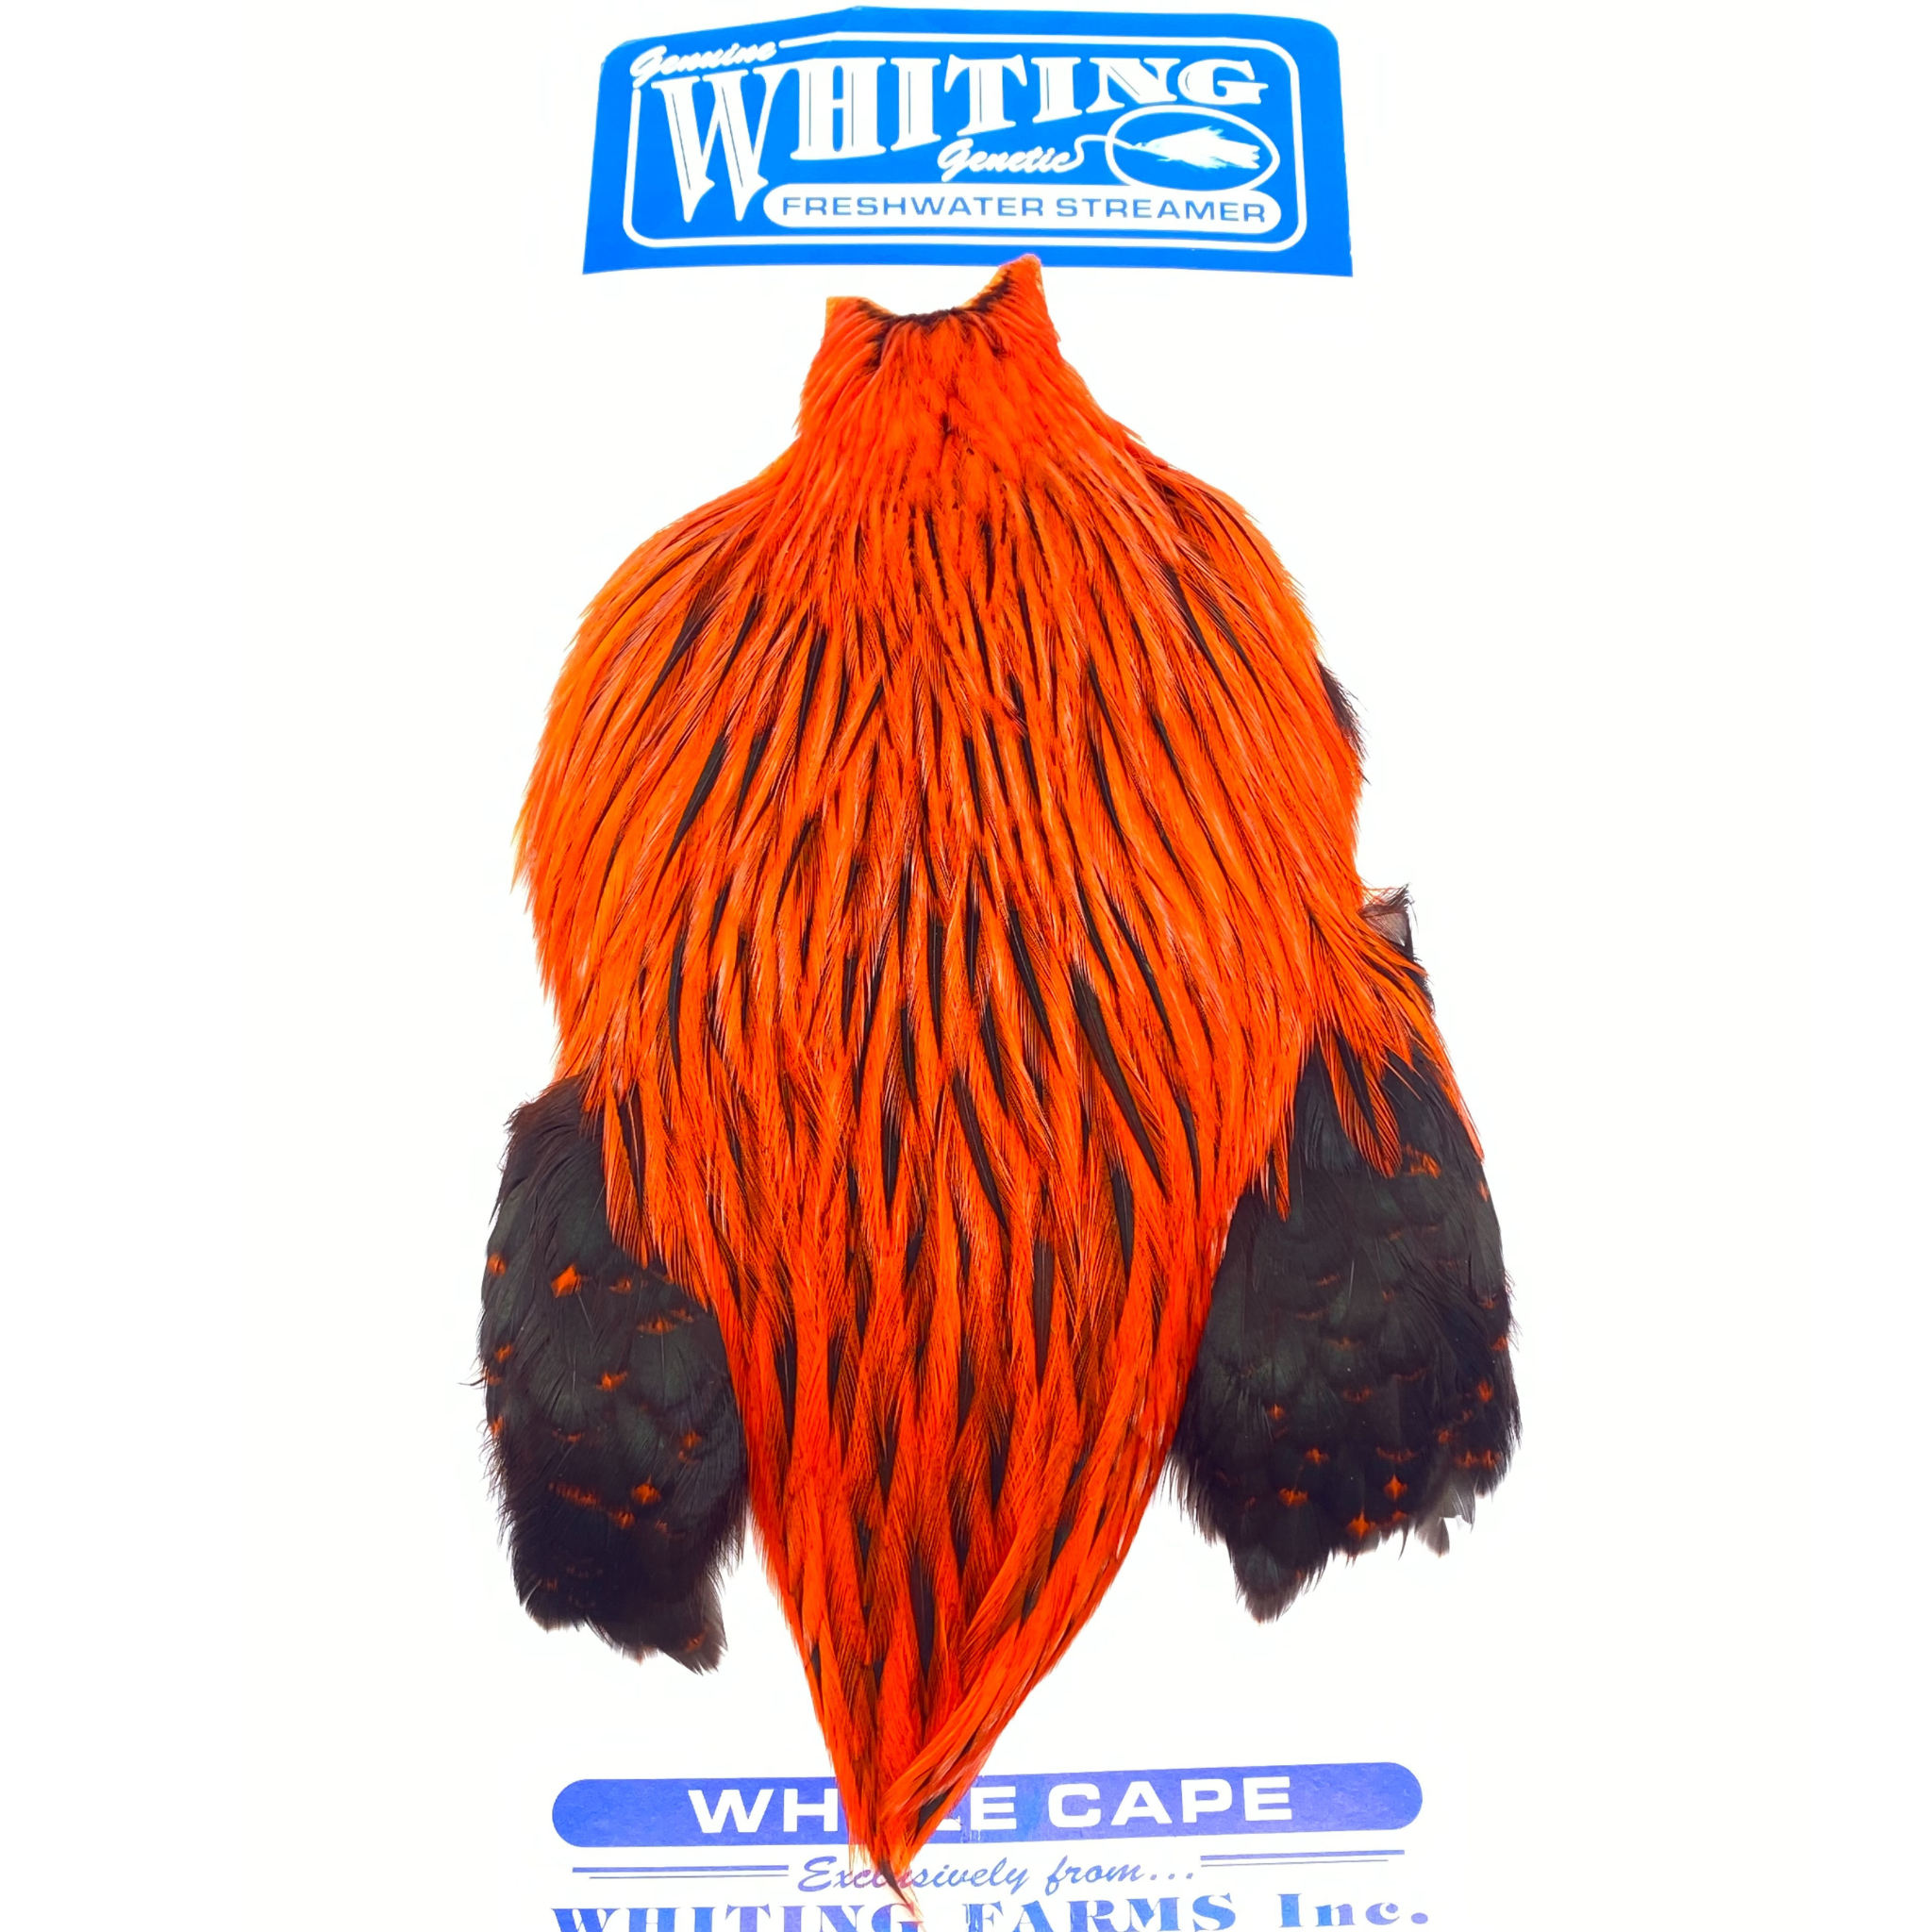 Whiting Freshwater Streamer Rooster Cape